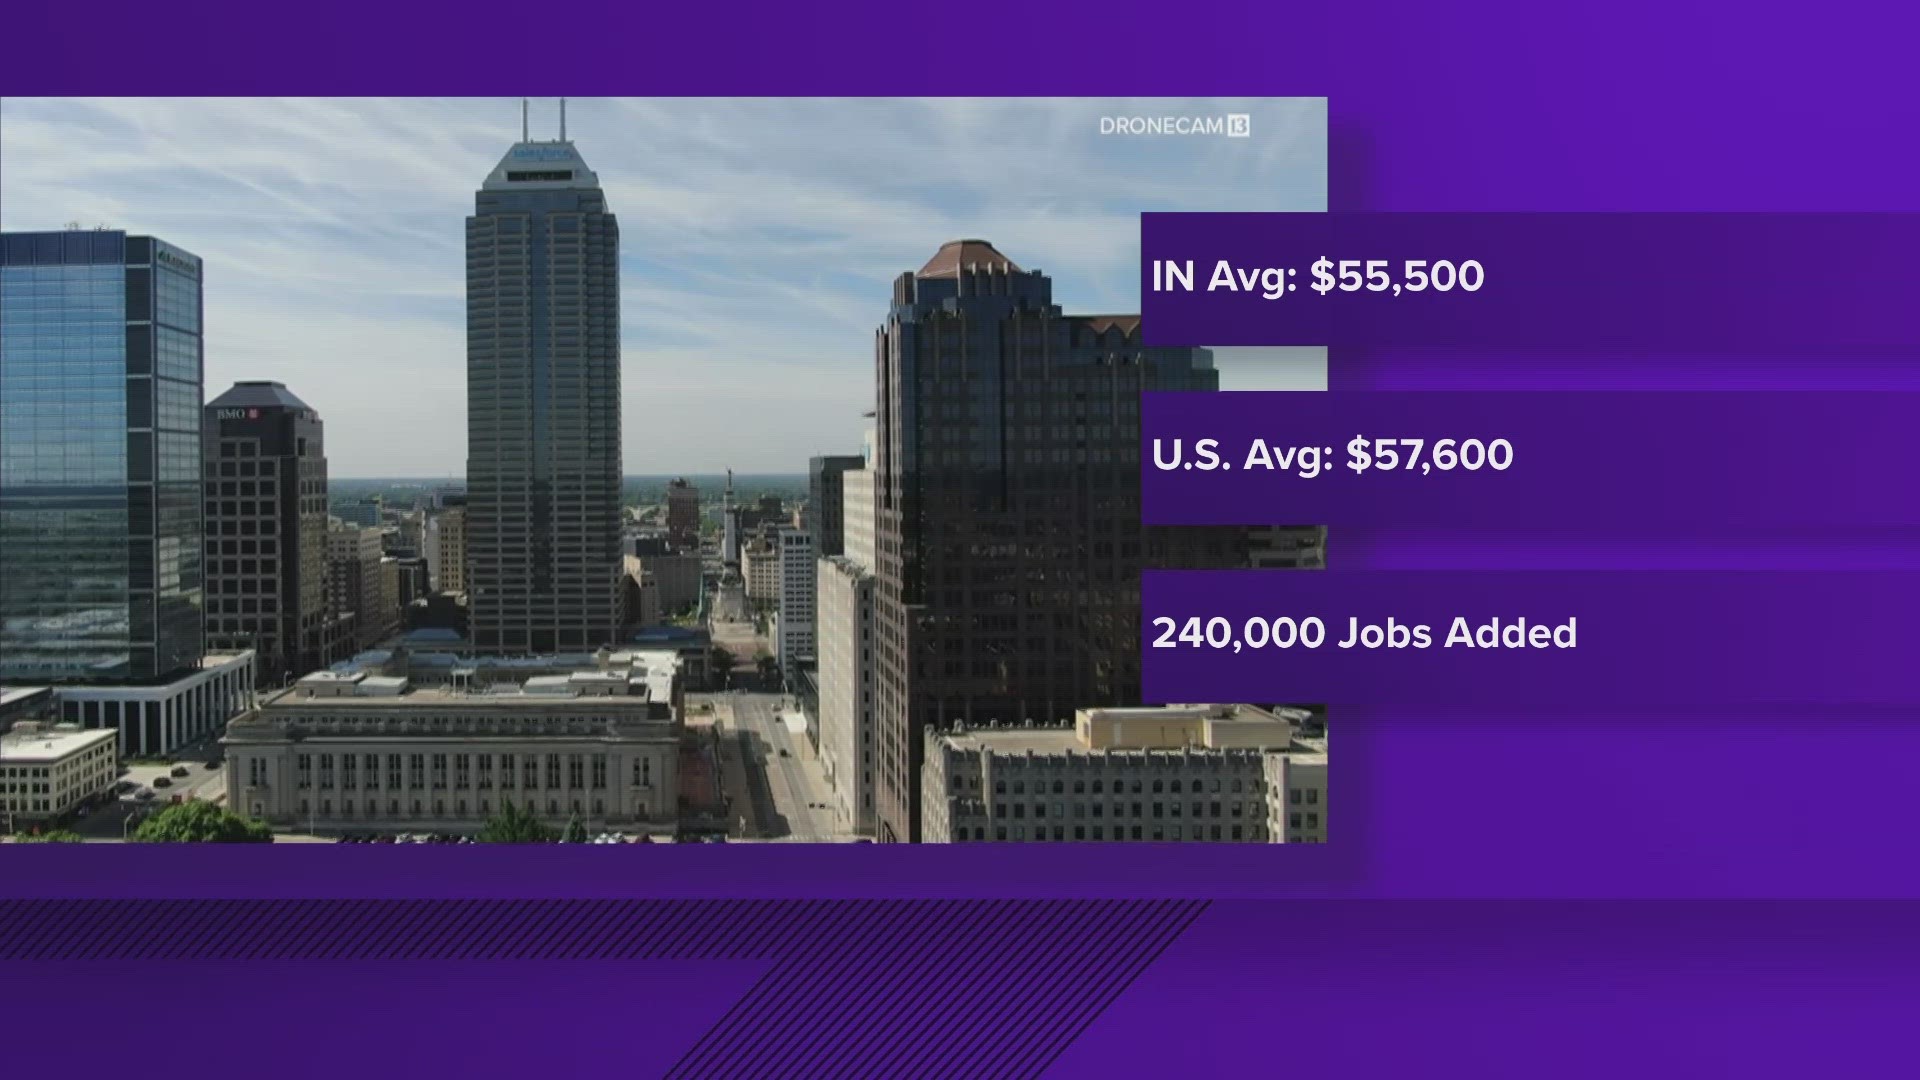 The median annual salary in Indiana is just over $55,000 dollars